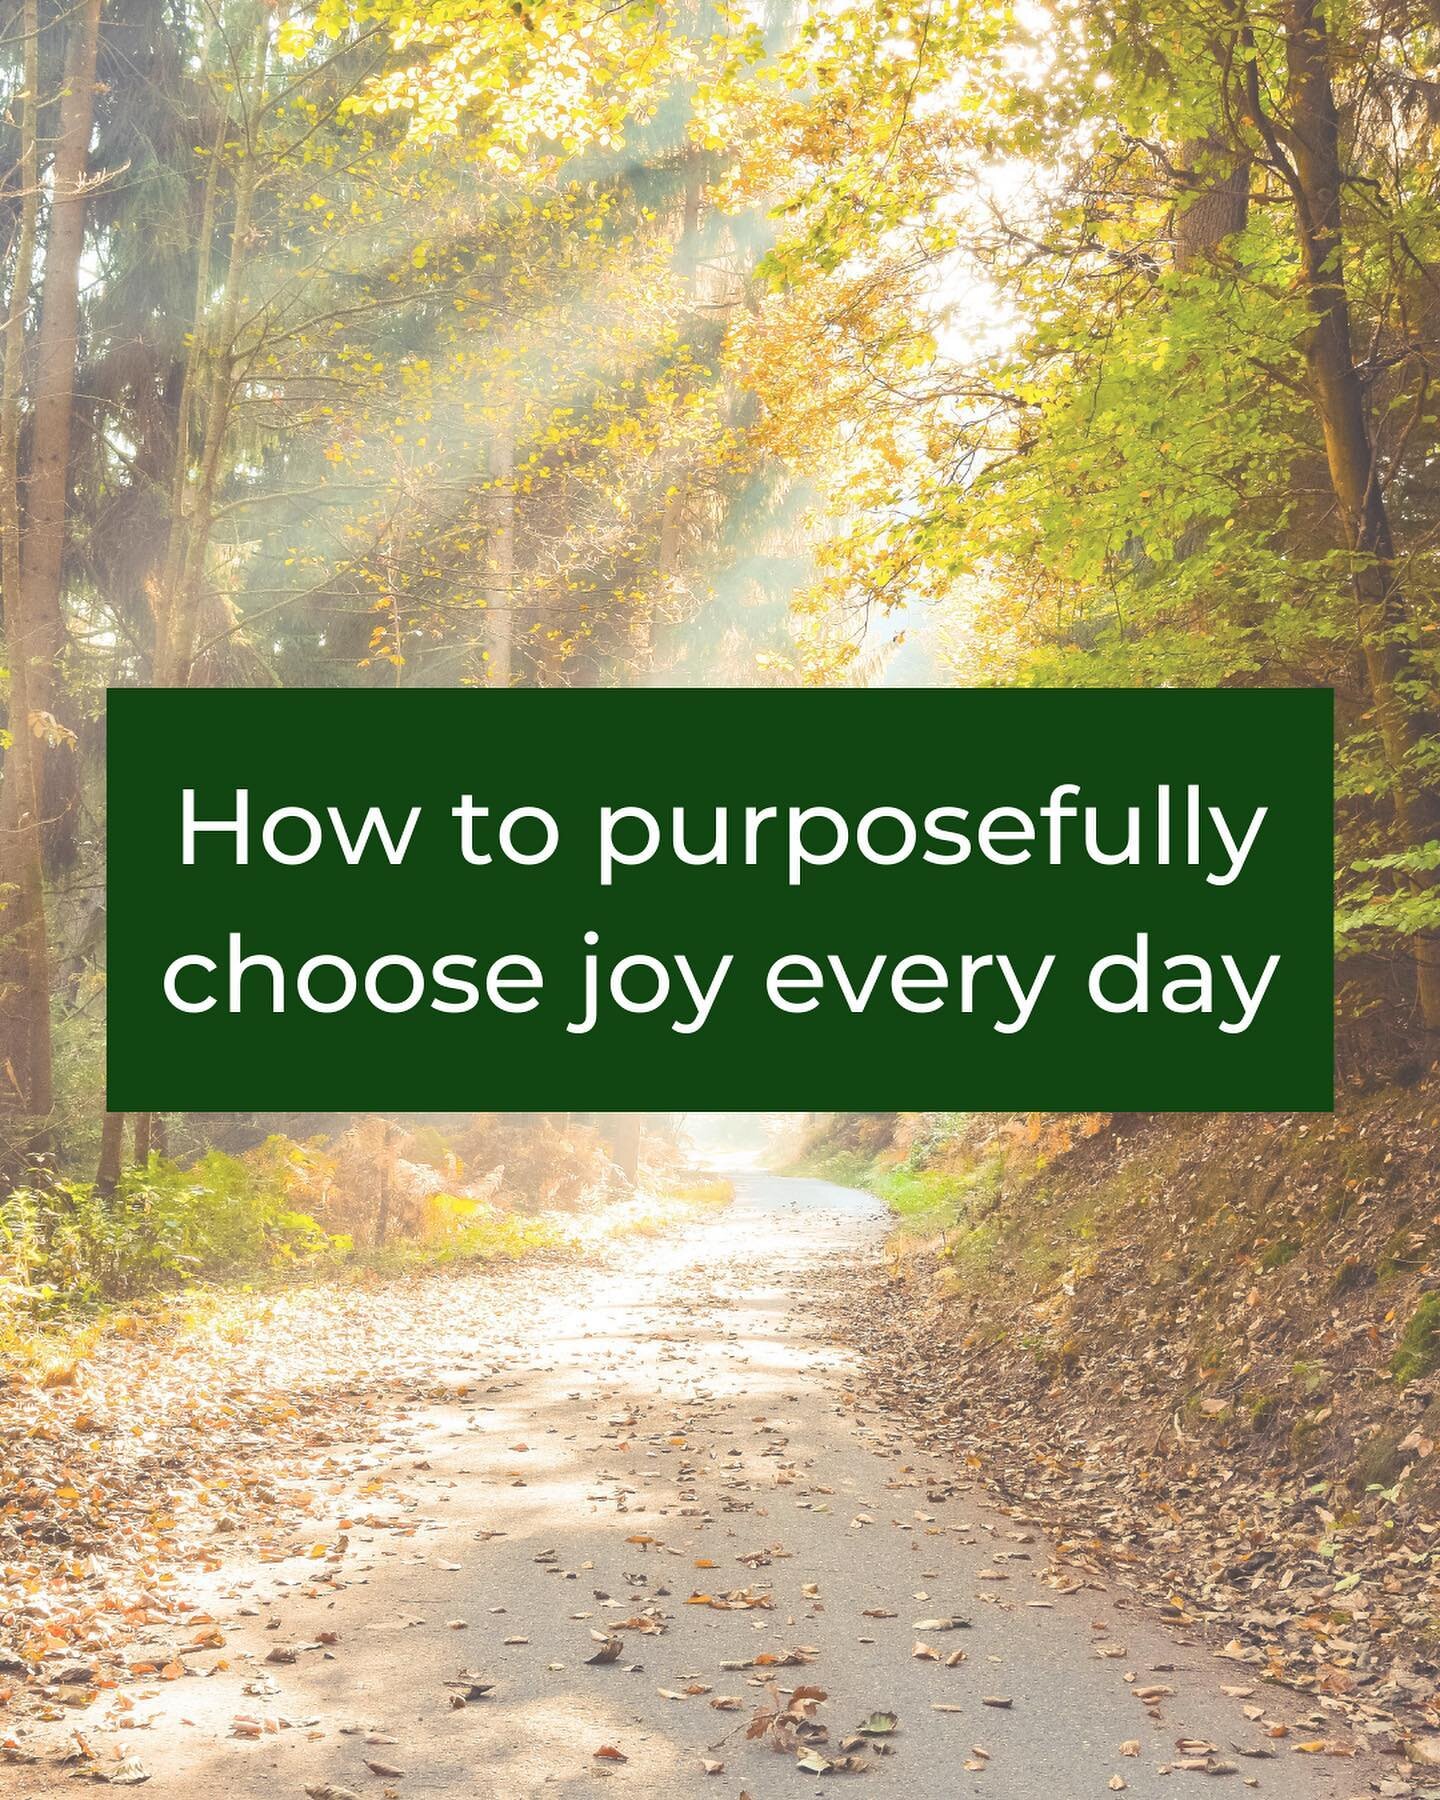 The power of purposefully choosing joy is incredible.

And I am passionate about supporting you to purposefully choose joy every day - in a way that is authentic to you. 

But first, let's start with understanding what joy is:

Joy is often associate